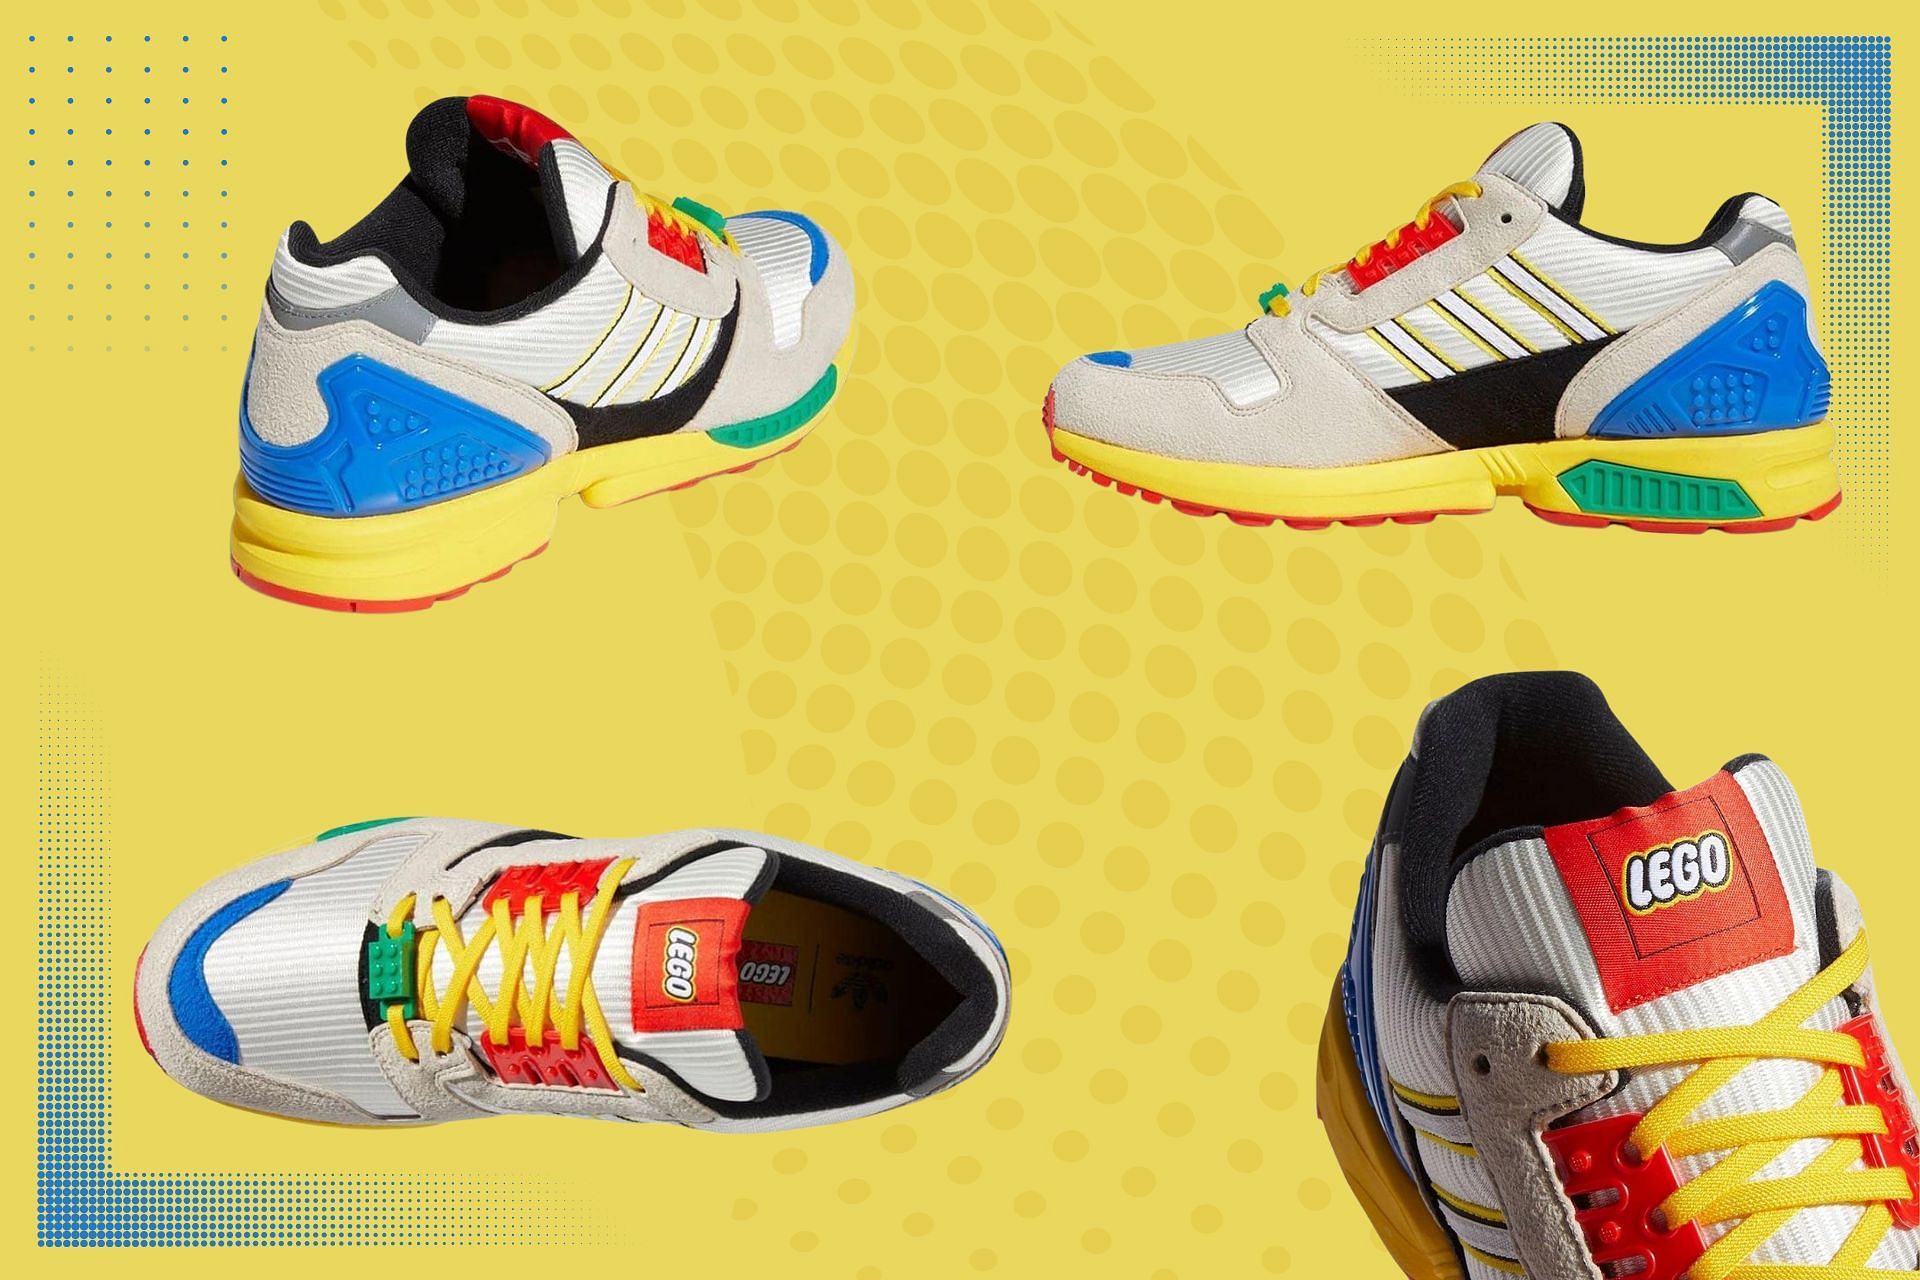 Take a closer look at the themed sneakers (Image via Sportskeeda)